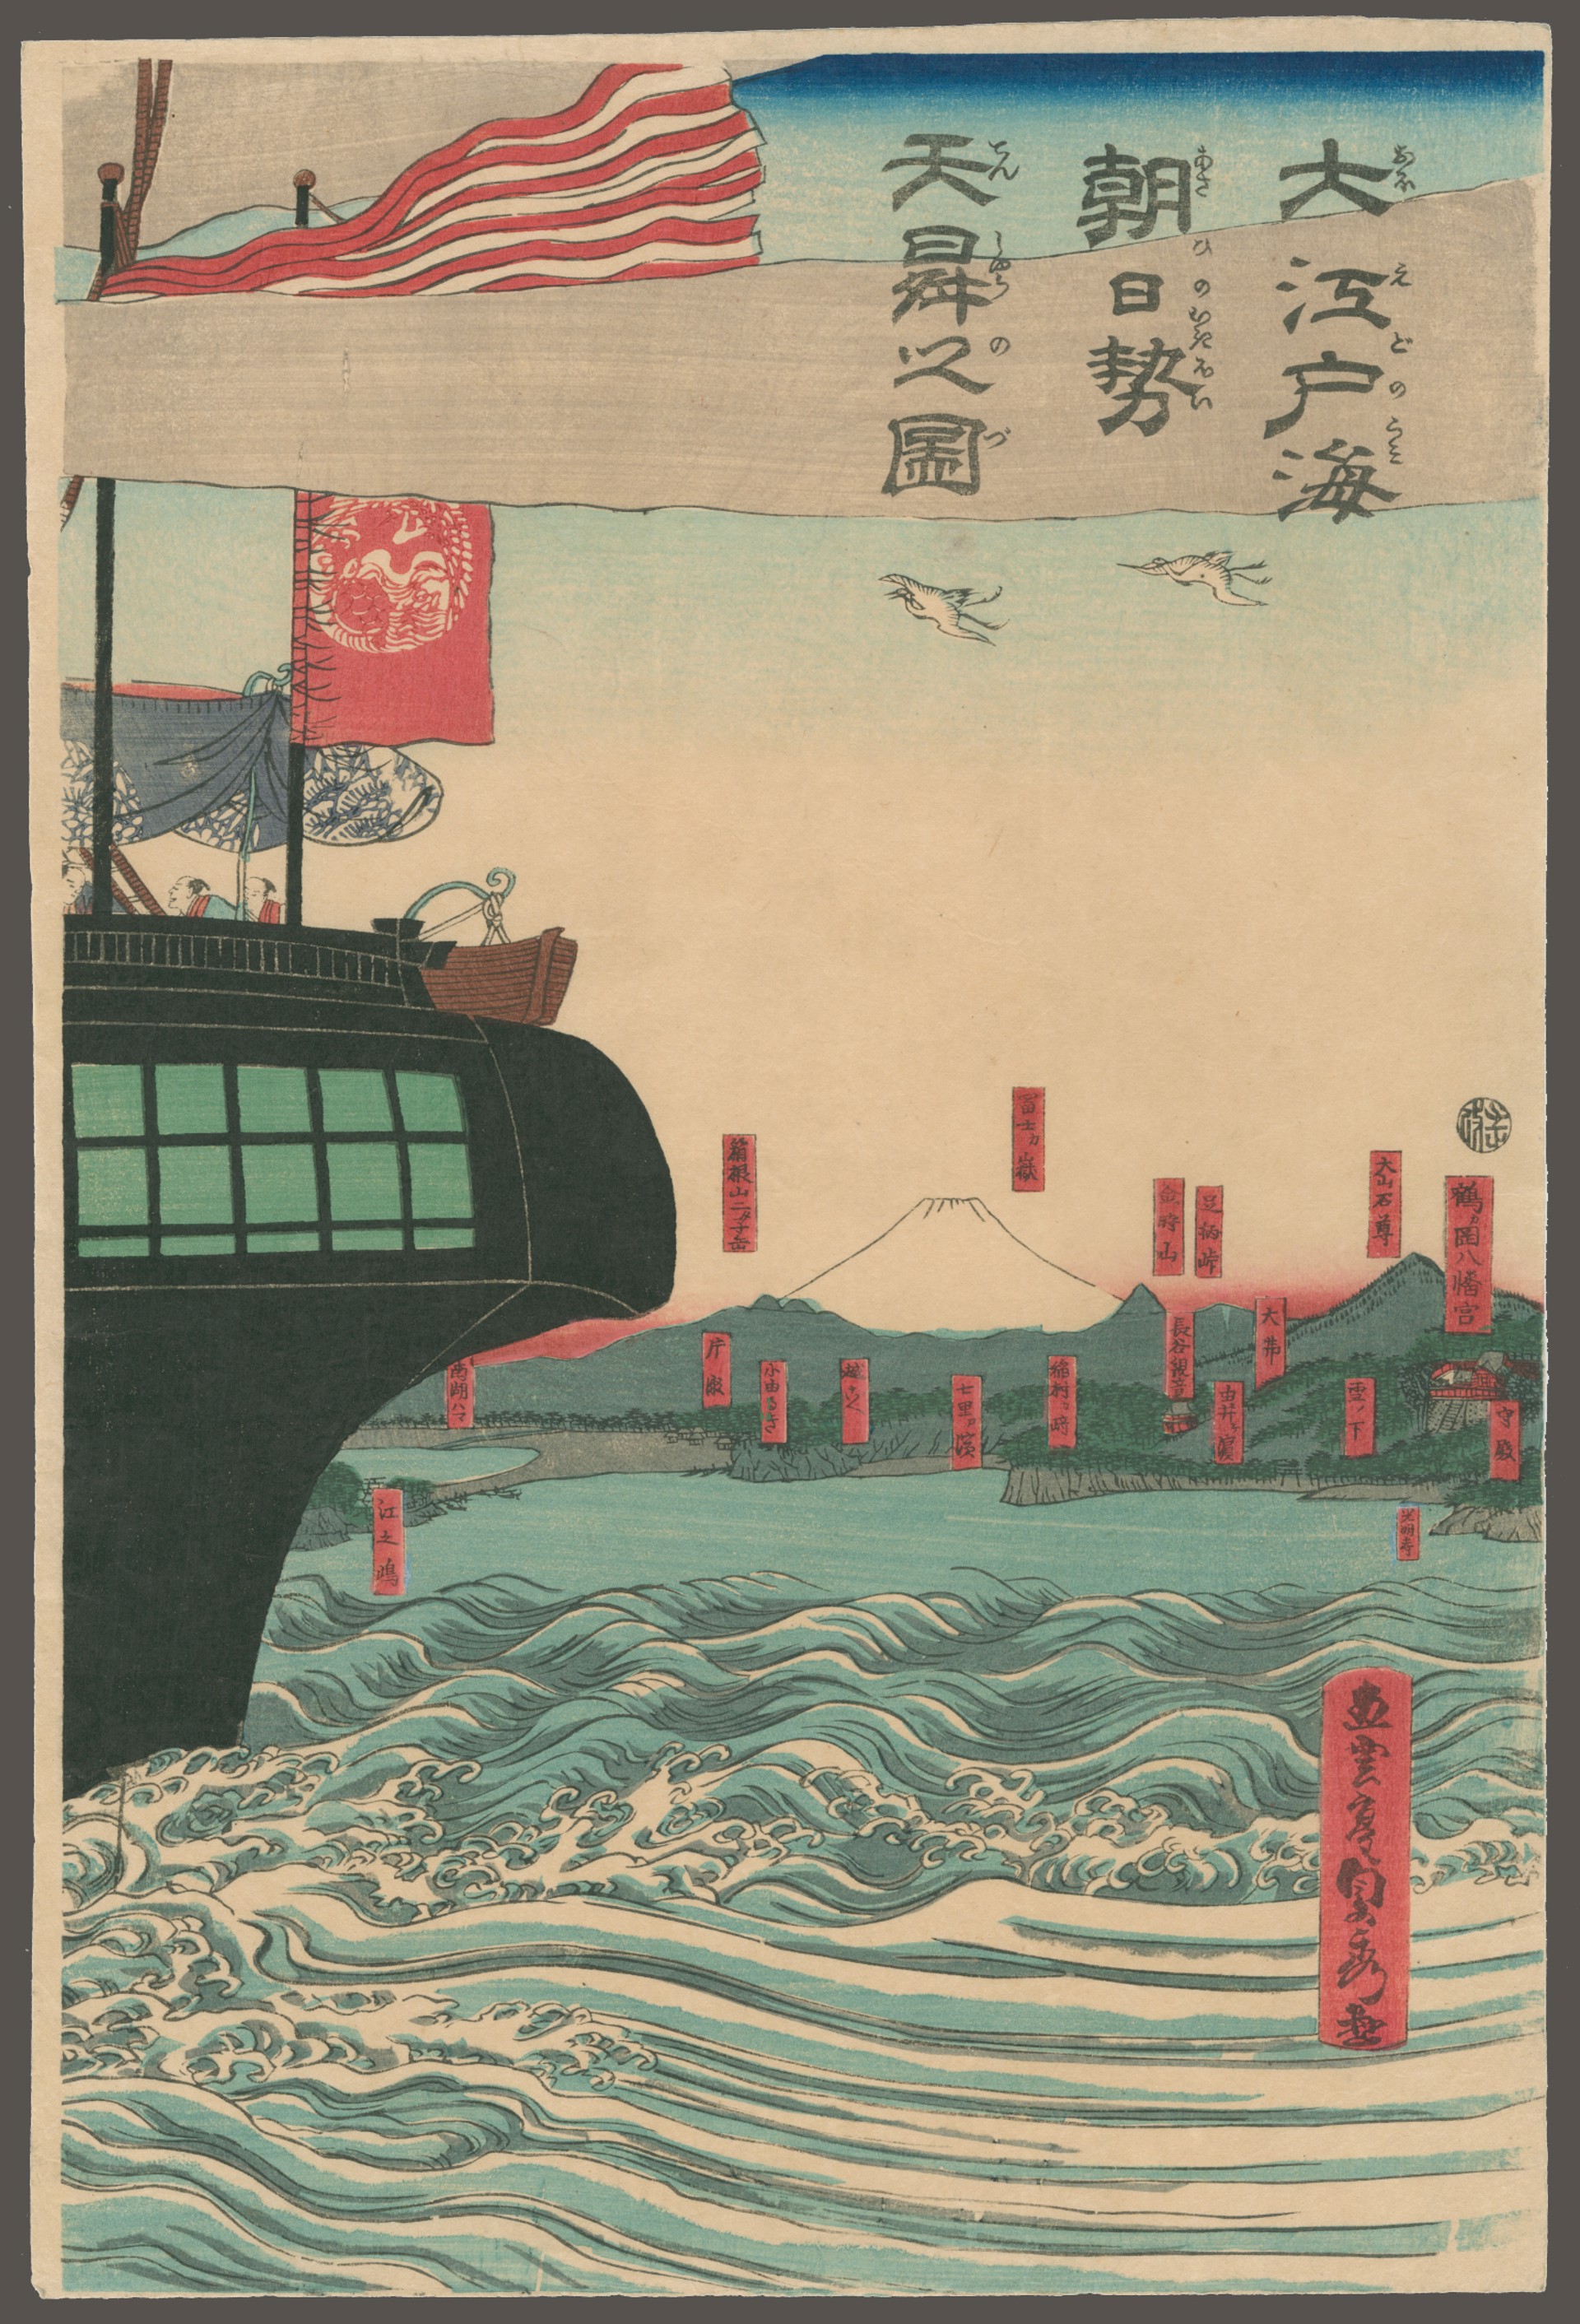 The Dai Edo Speeds Out to Sea at Dawn on a Beautiful Day by Sadahide